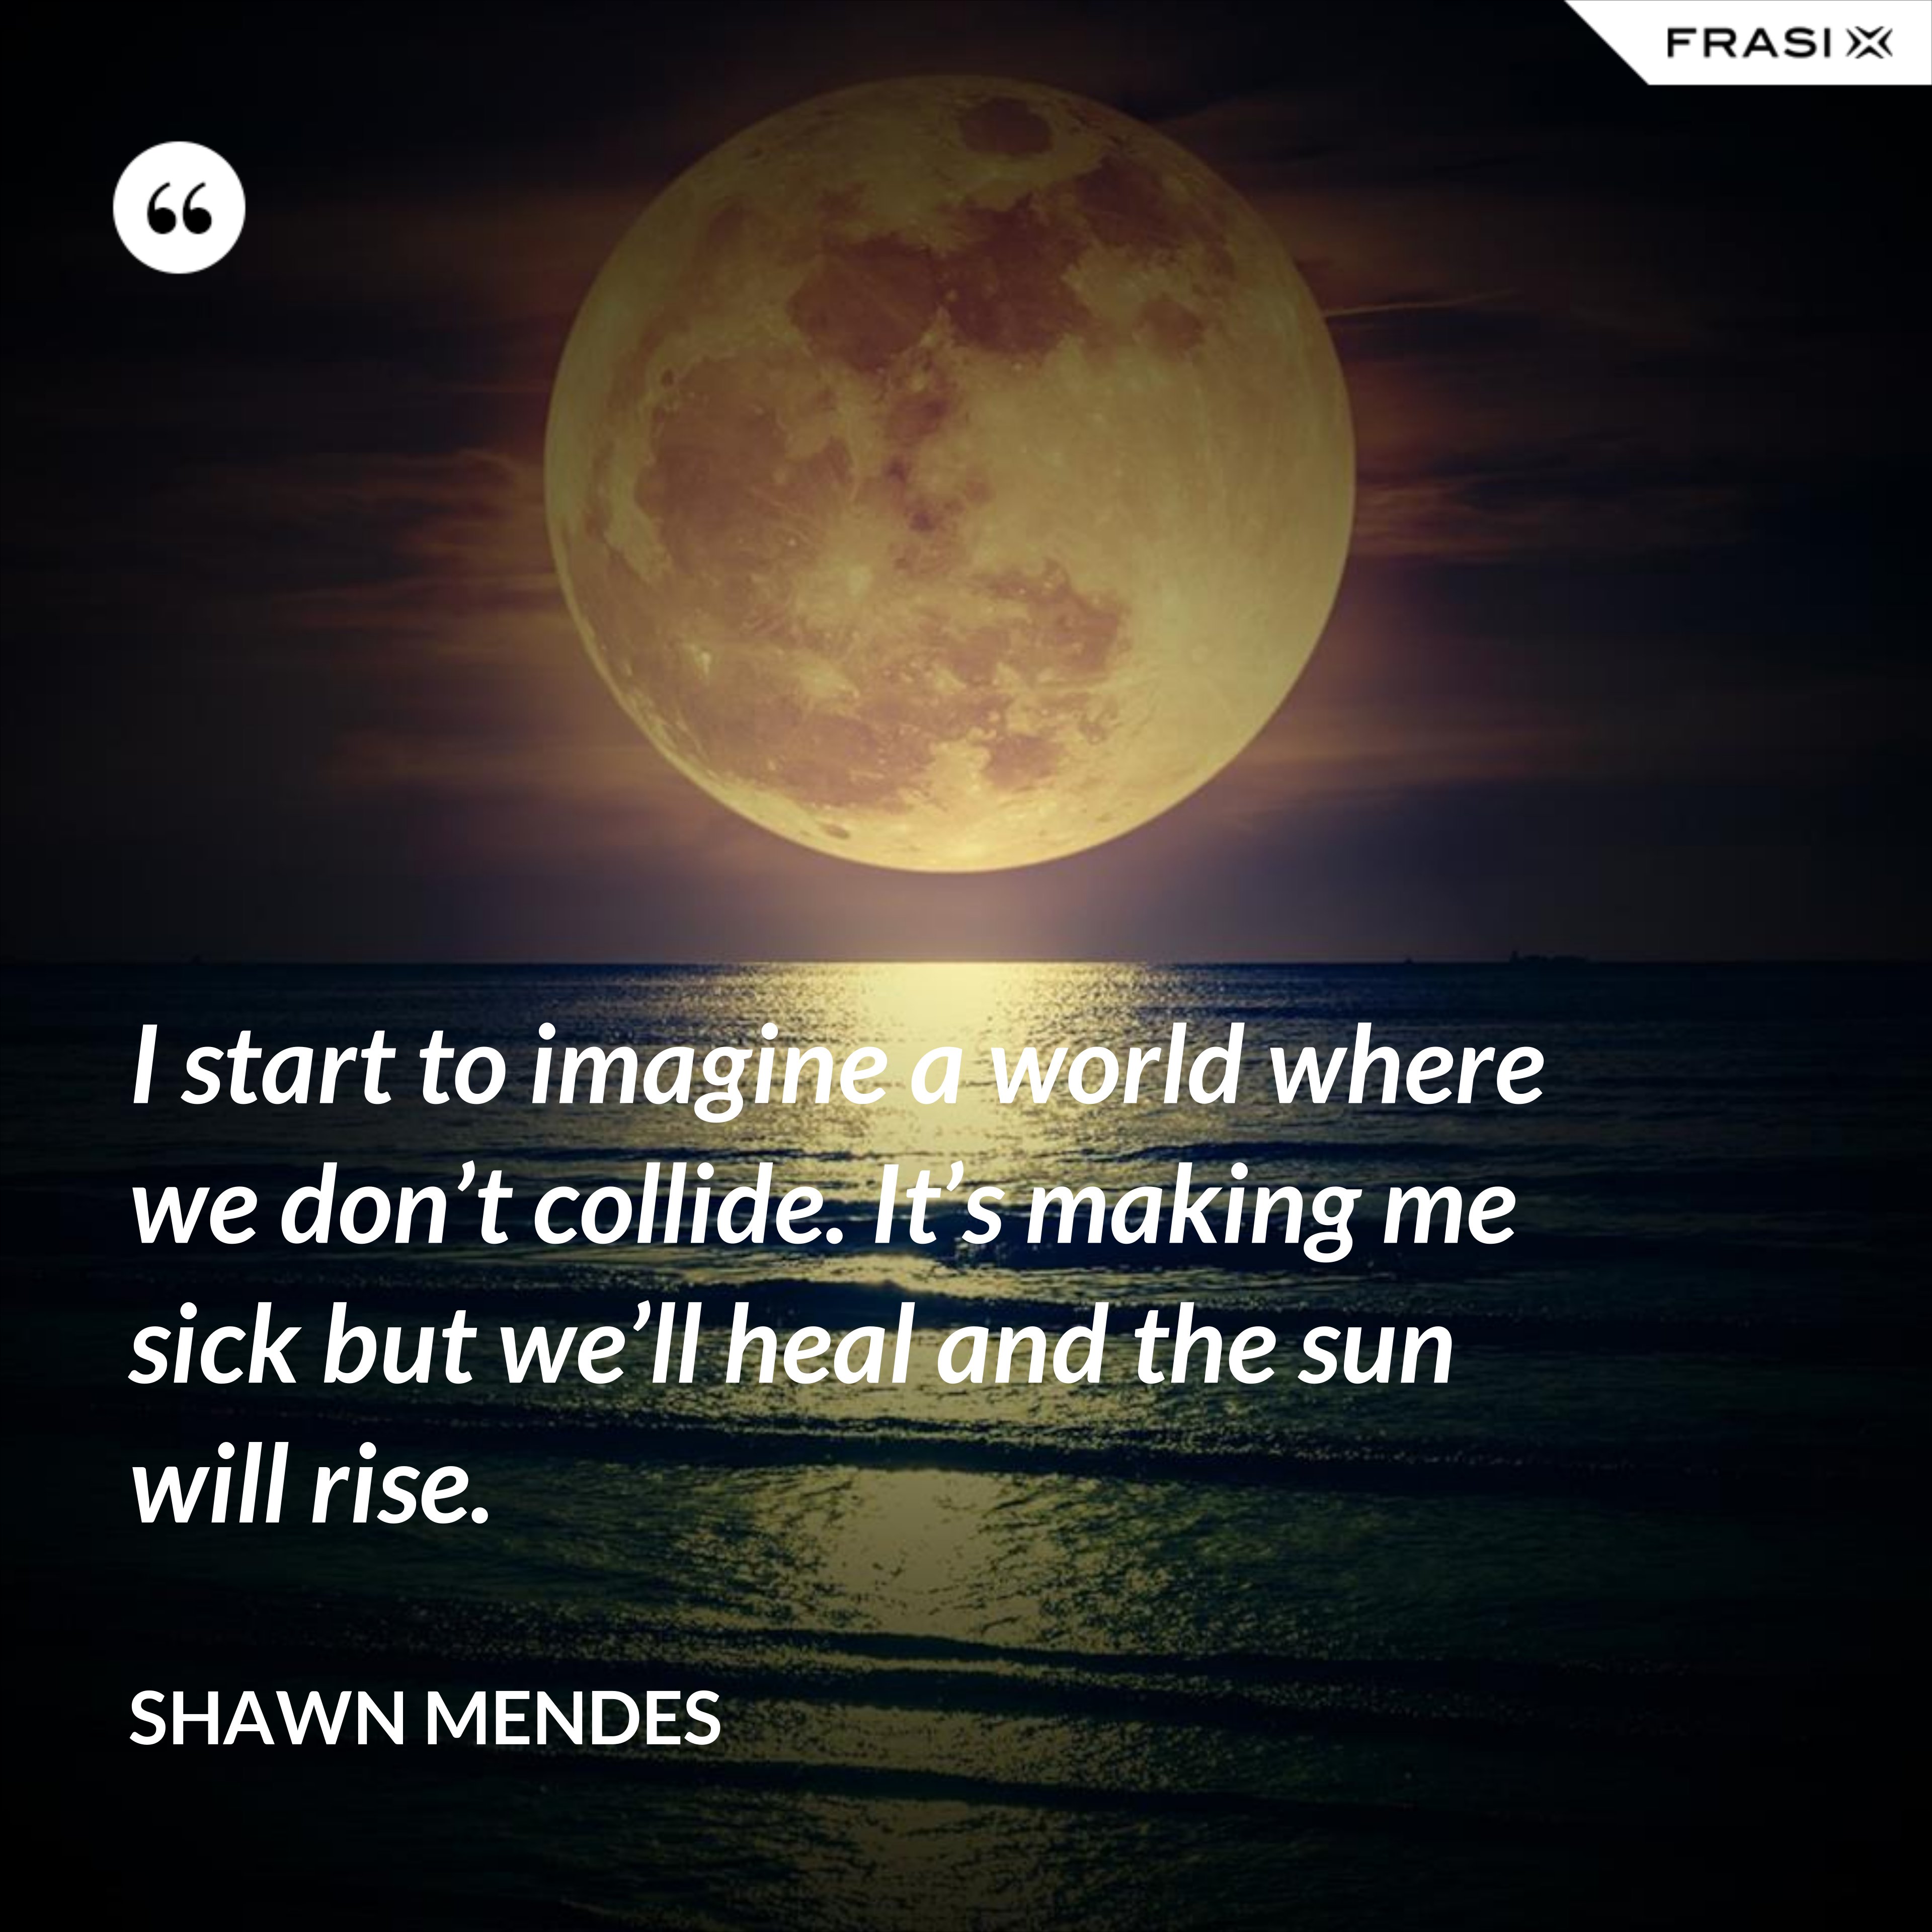 I start to imagine a world where we don’t collide. It’s making me sick but we’ll heal and the sun will rise. - Shawn Mendes